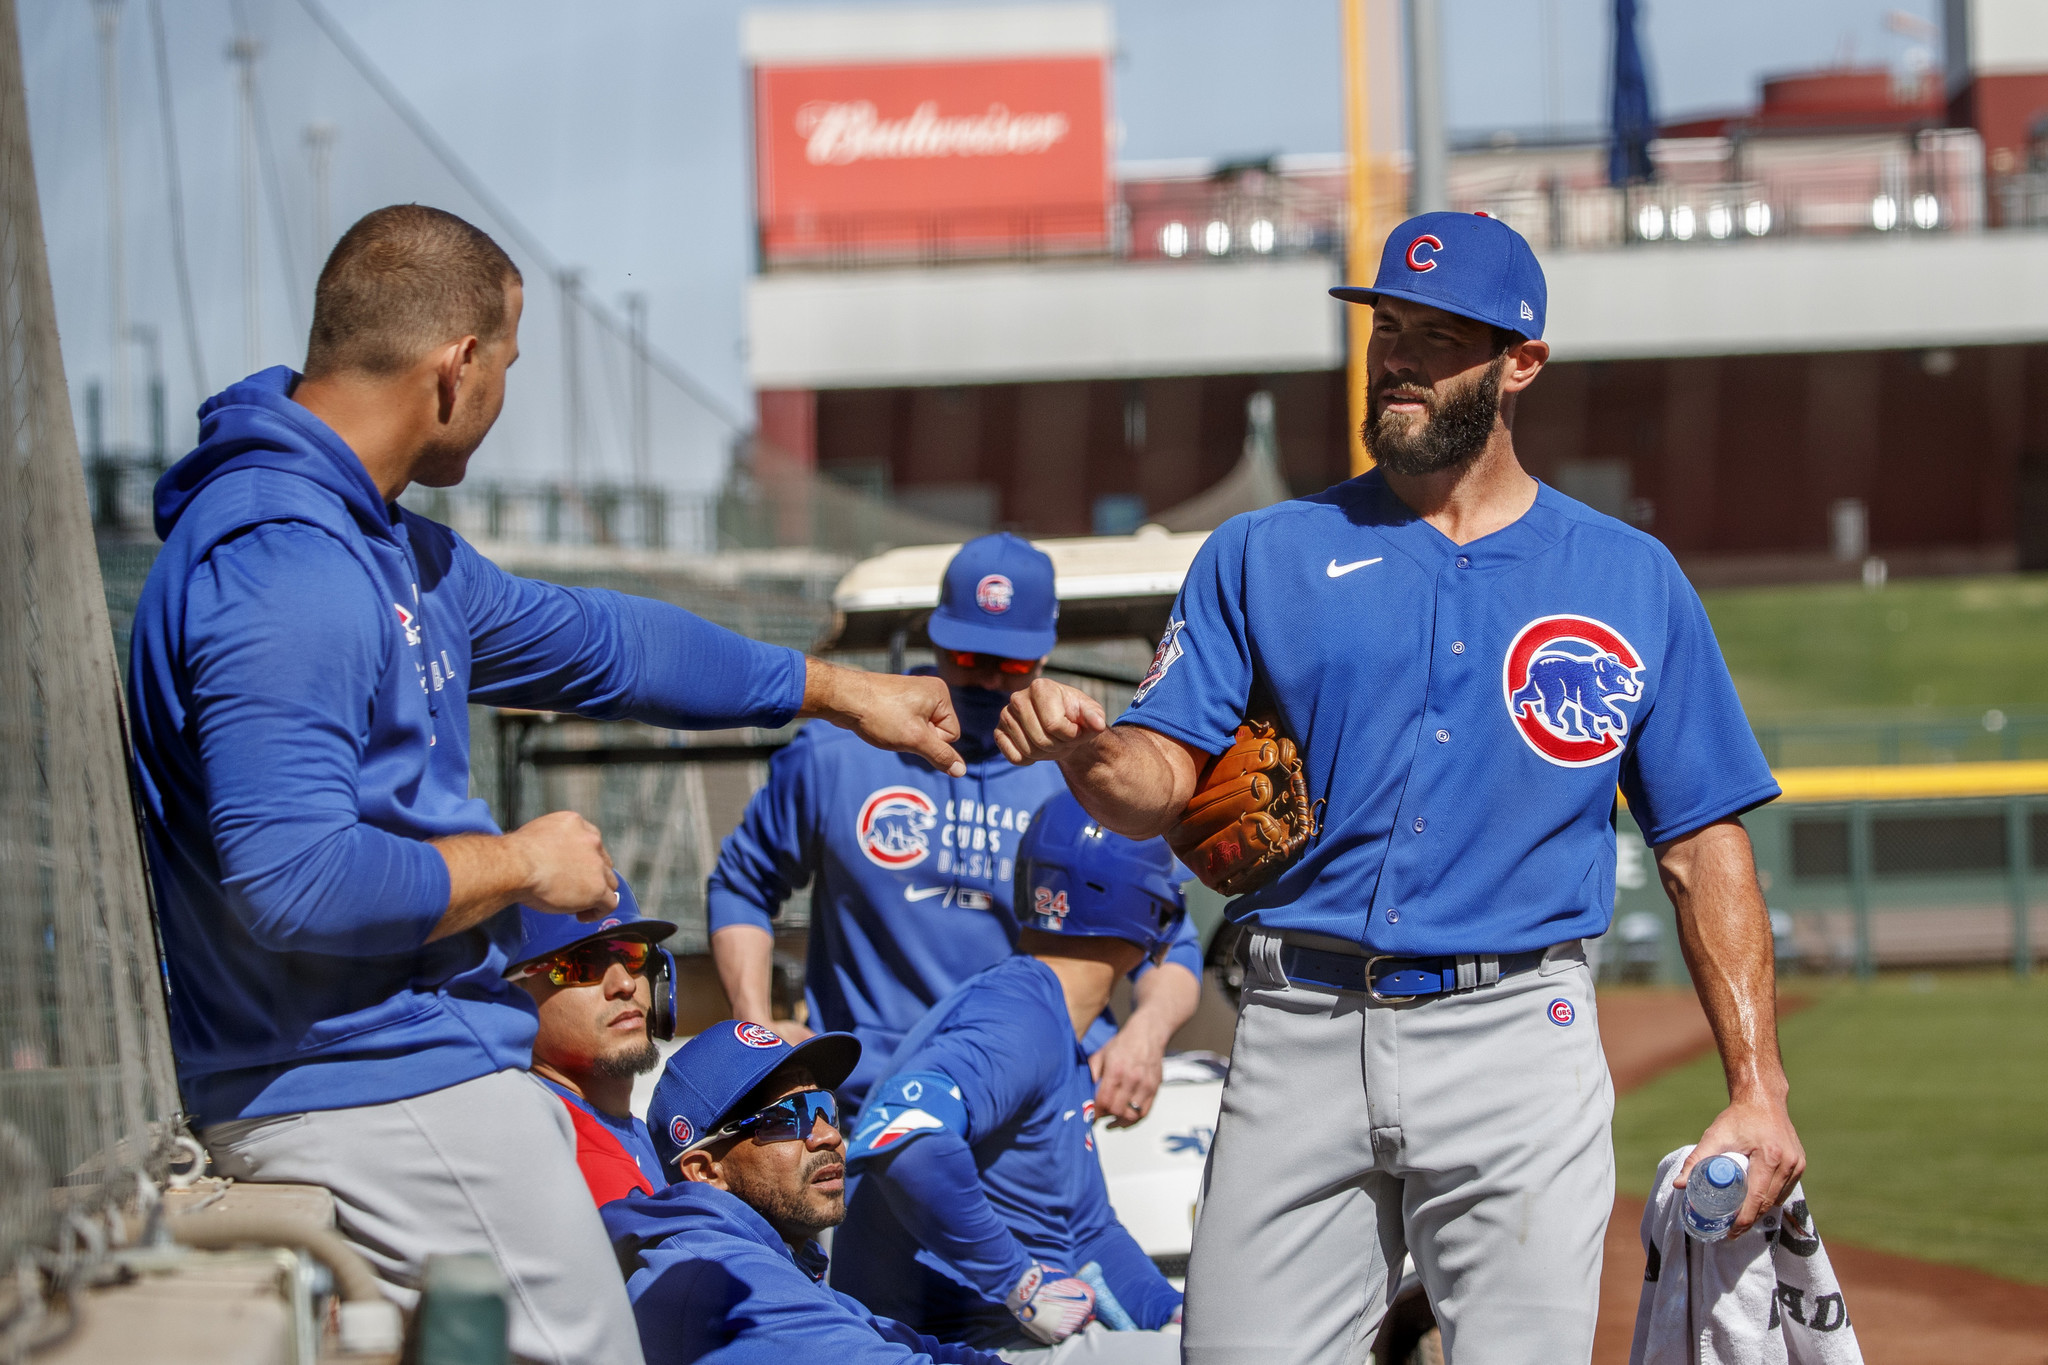 Jake Arrieta takes the mound as the Chicago Cubs continue spring training